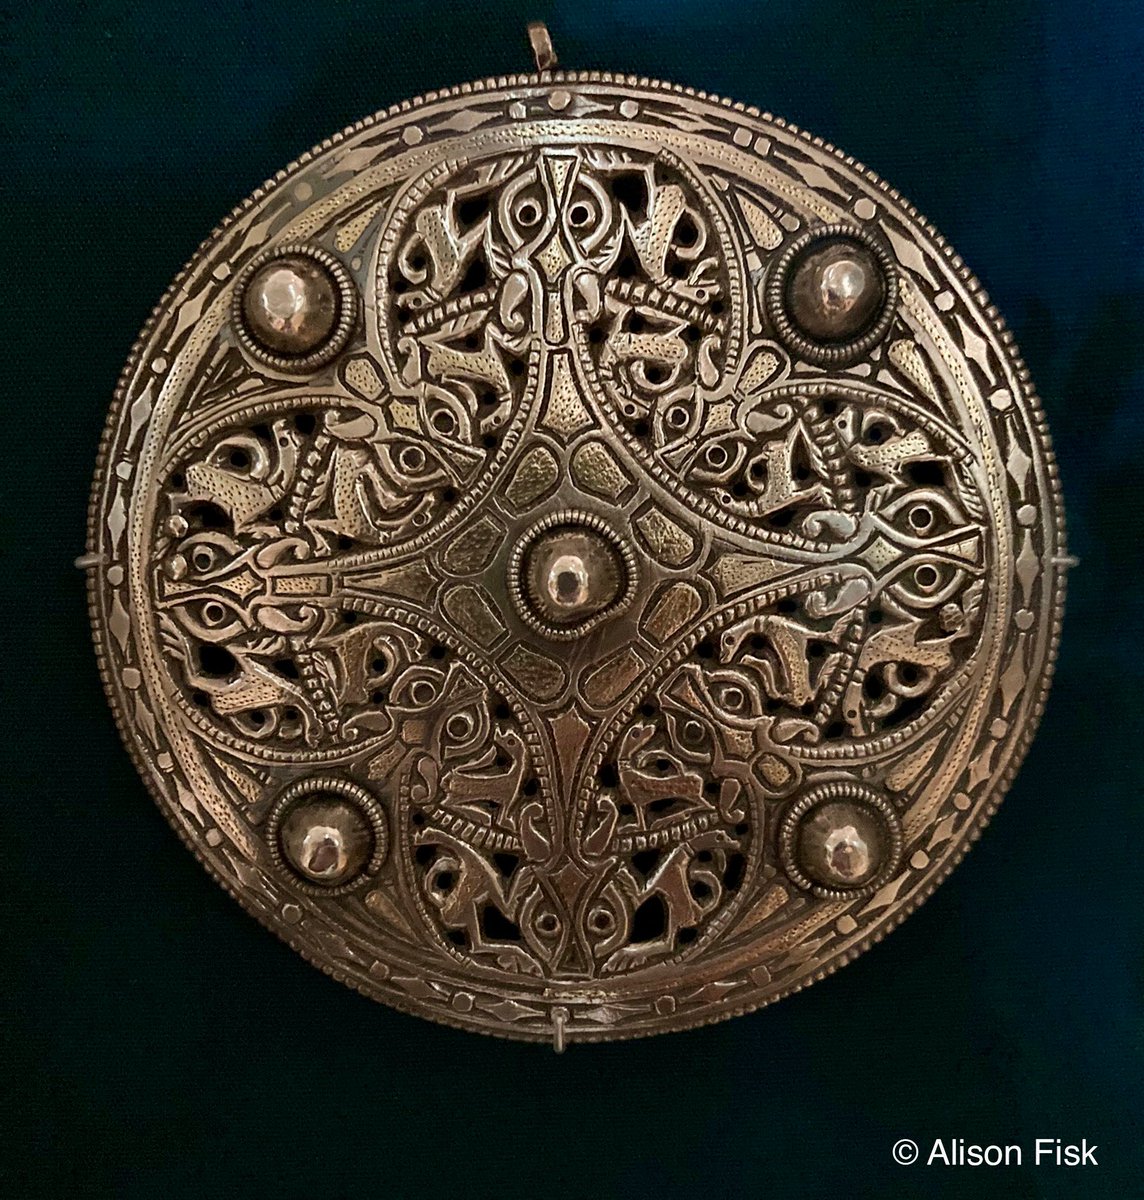 The Anglo-Saxon ‘Strickland Brooch’. AD 800s. A silver disc brooch with gold and niello inlay. Decorated with an intricate pattern of intertwined animals. 📷 my own

#Archaeology